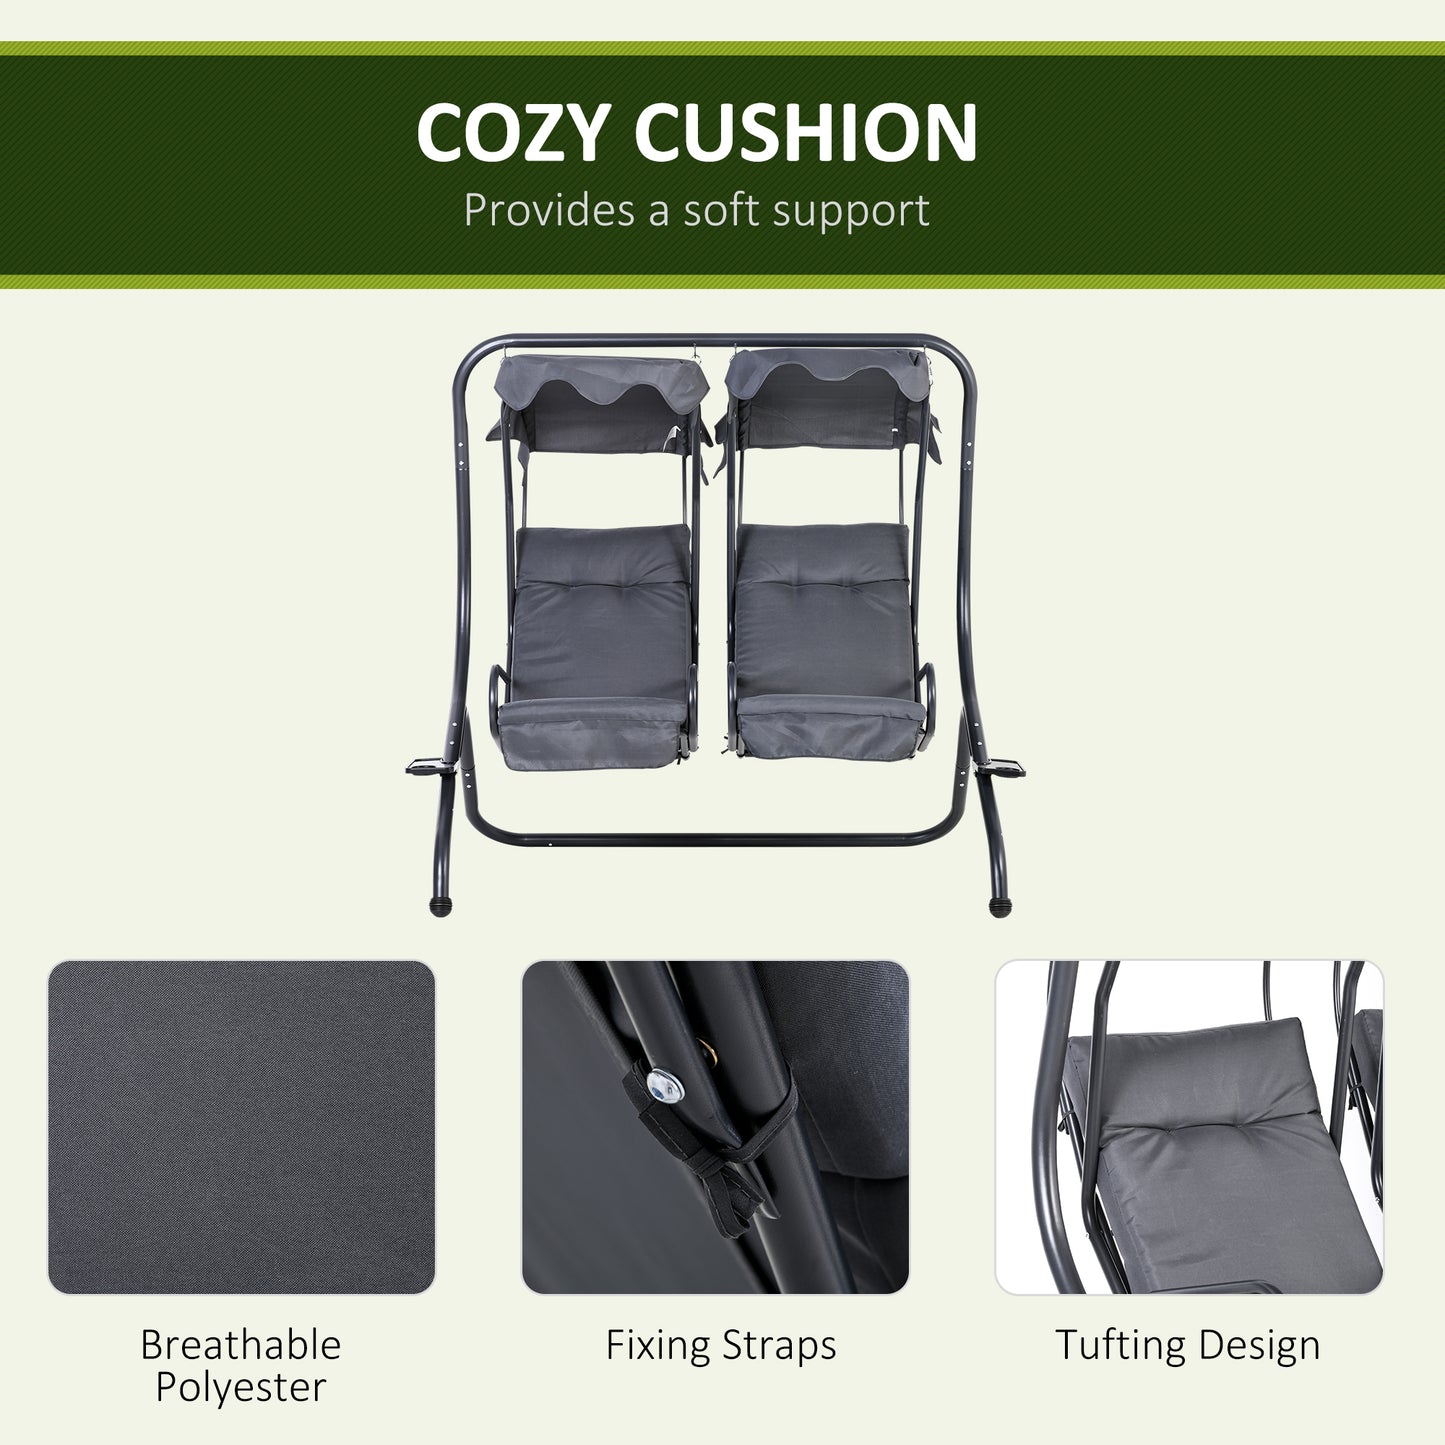 Outsunny Canopy Swing Modern Outdoor Relax Chairs w/ 2 Separate Chairs, Cushions and Removable Shade Canopy, Grey